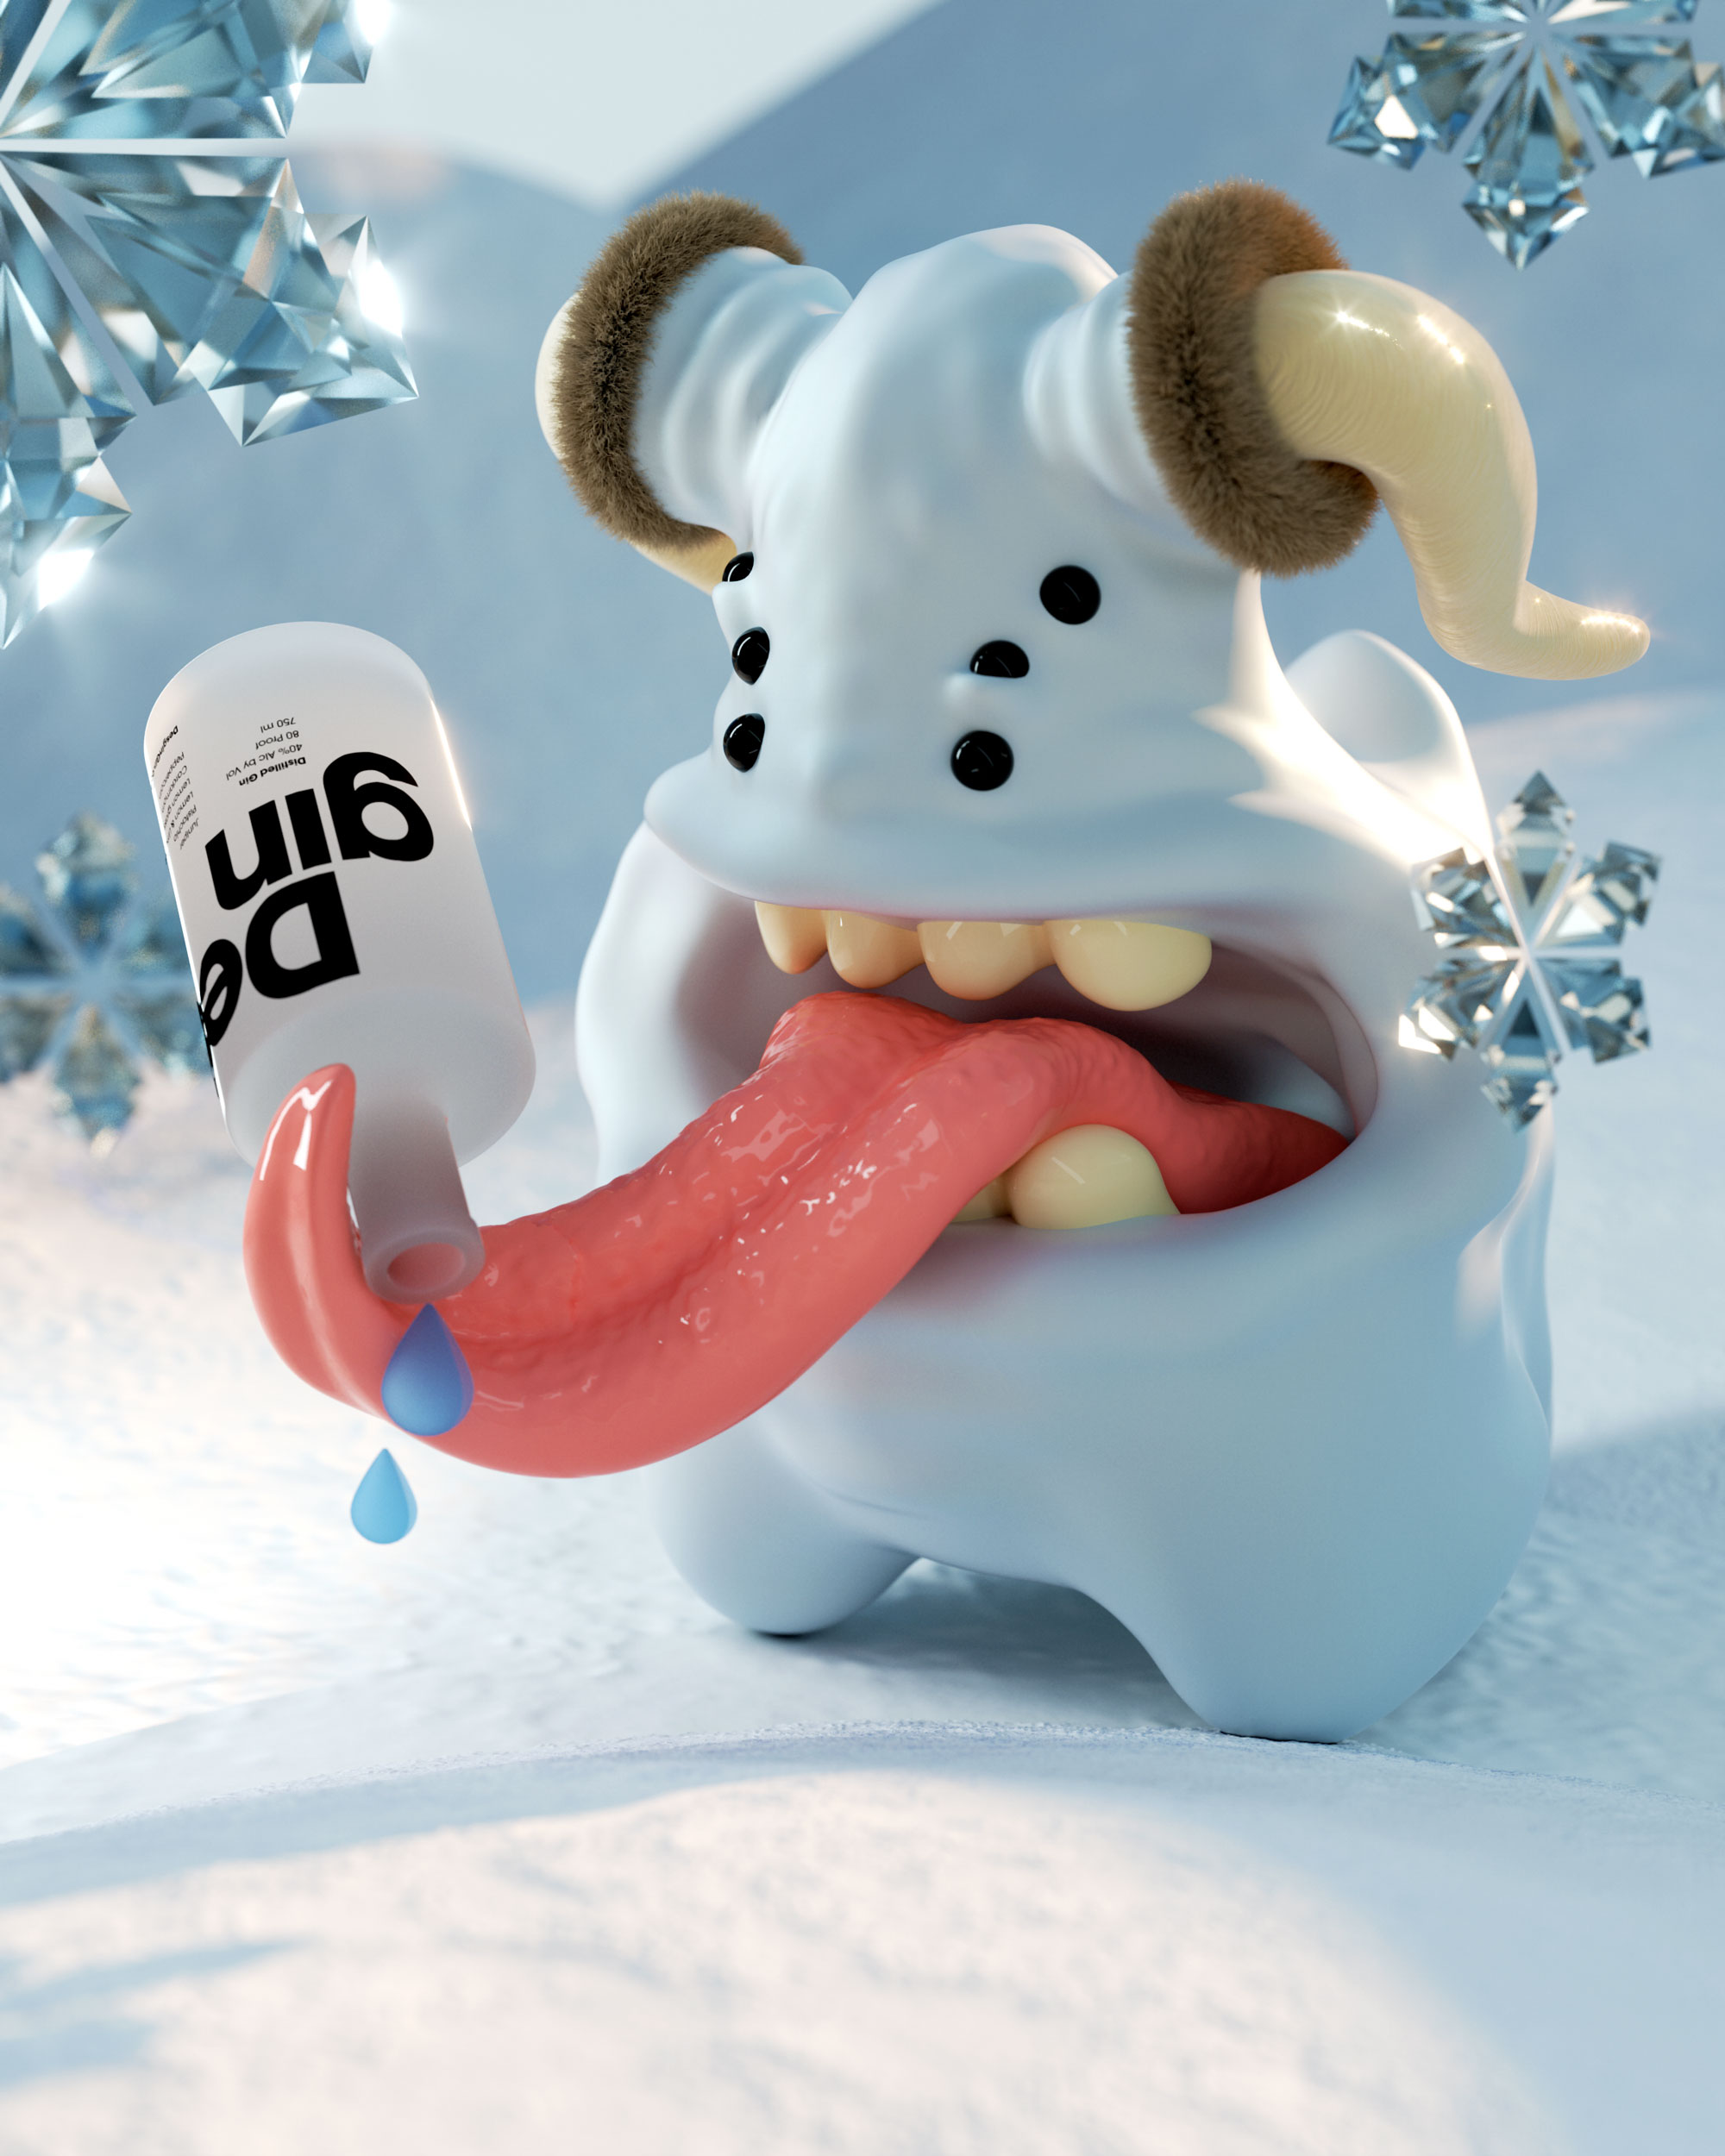 image of a toy yeti drinking with his tongue